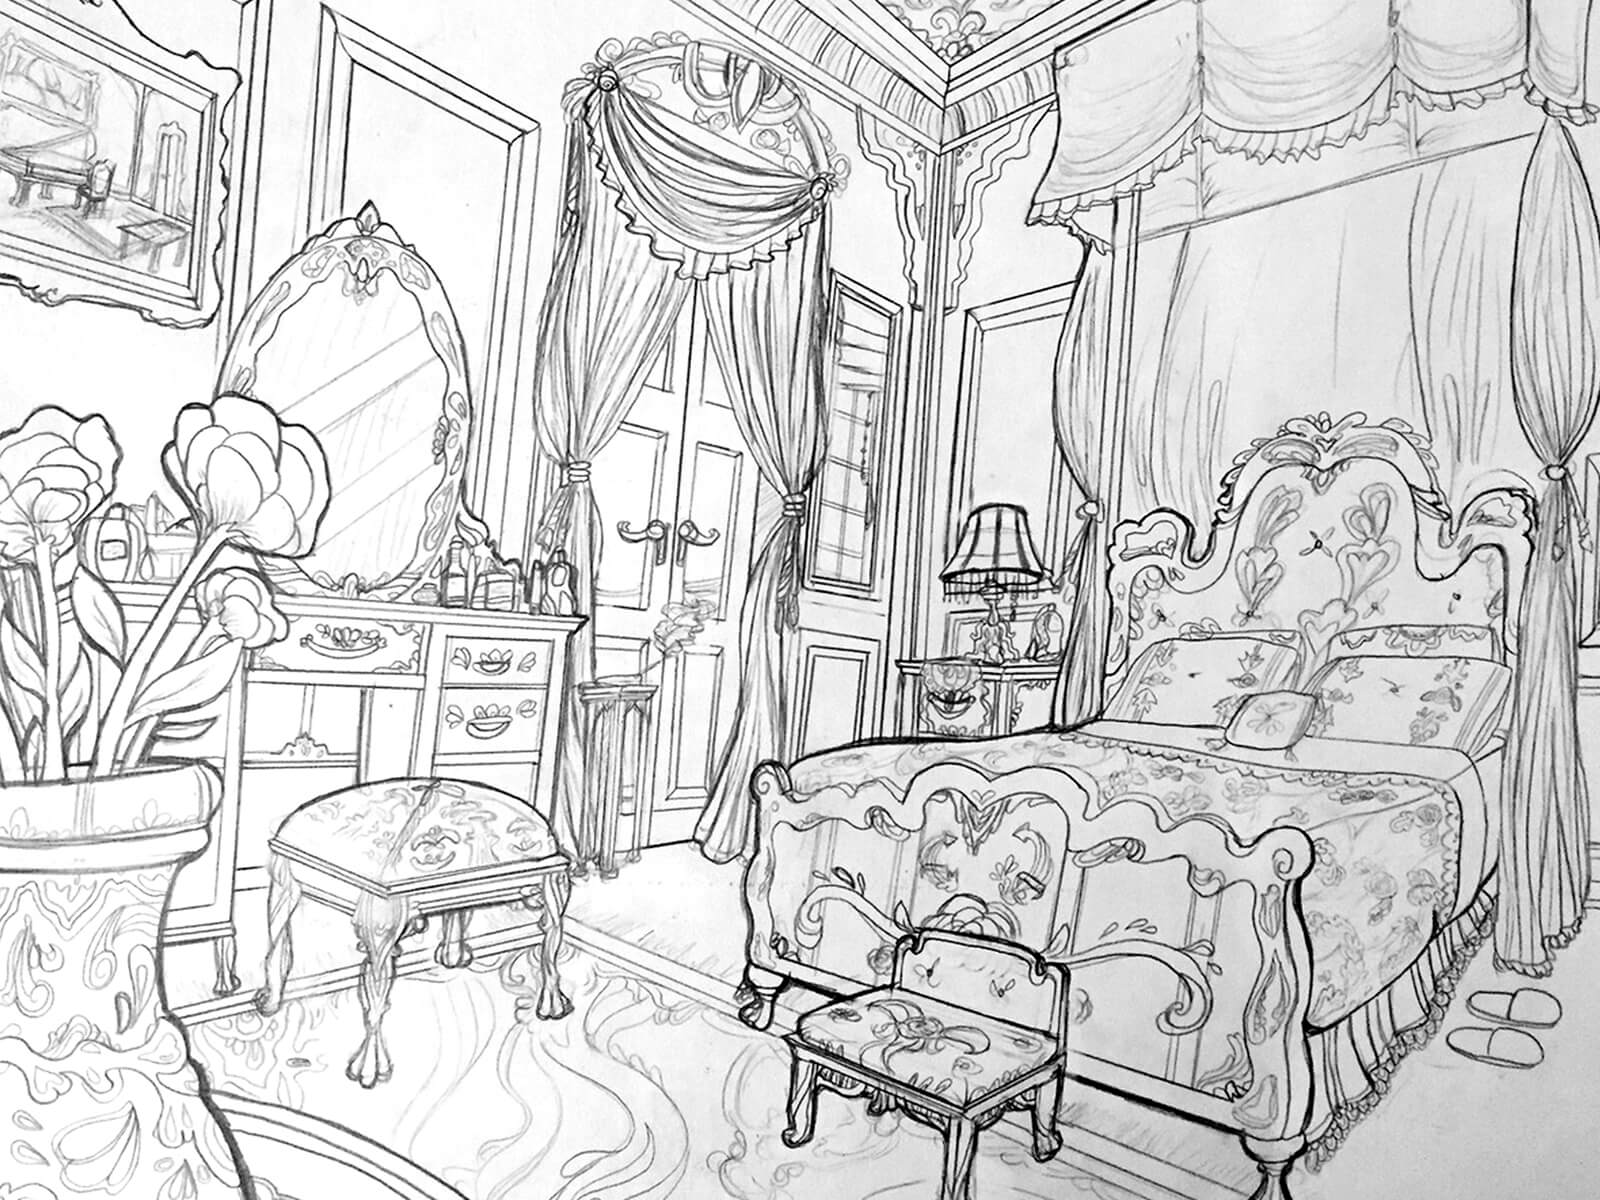 perspective drawing of an elaborate bedroom with swags of fabric, ornate furniture, and a vase filled with flowers